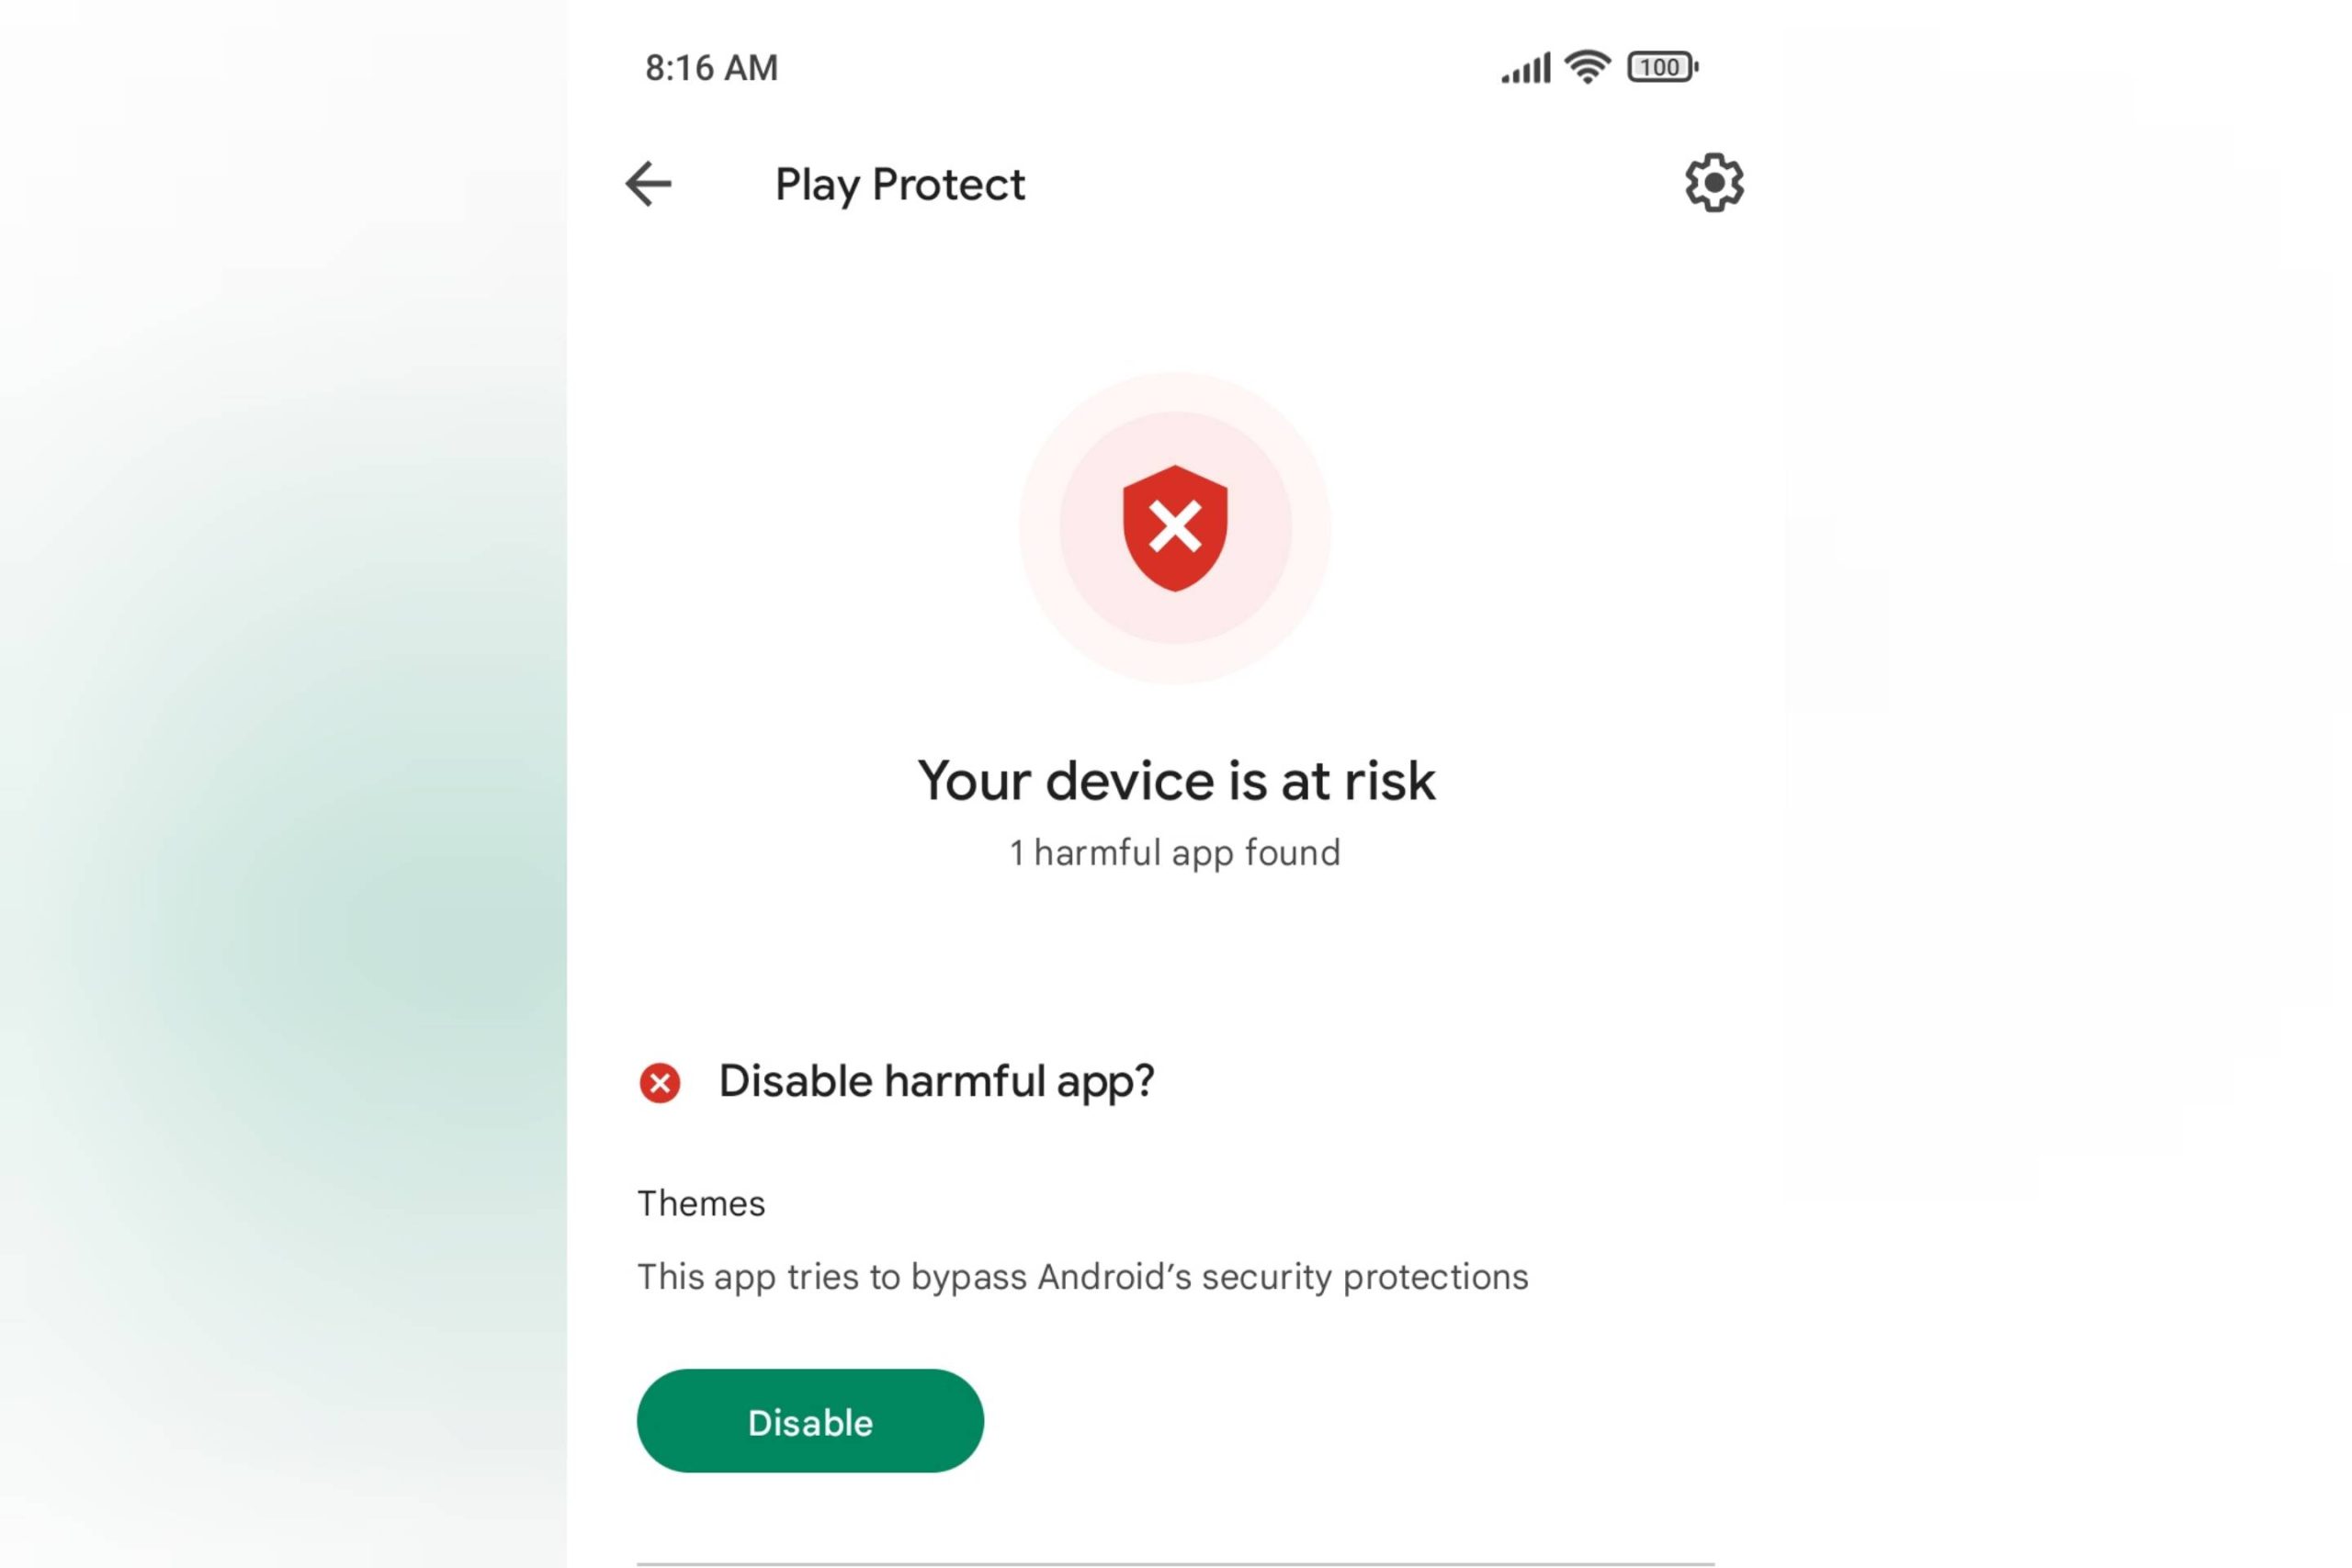 Play Protect - Device at risk